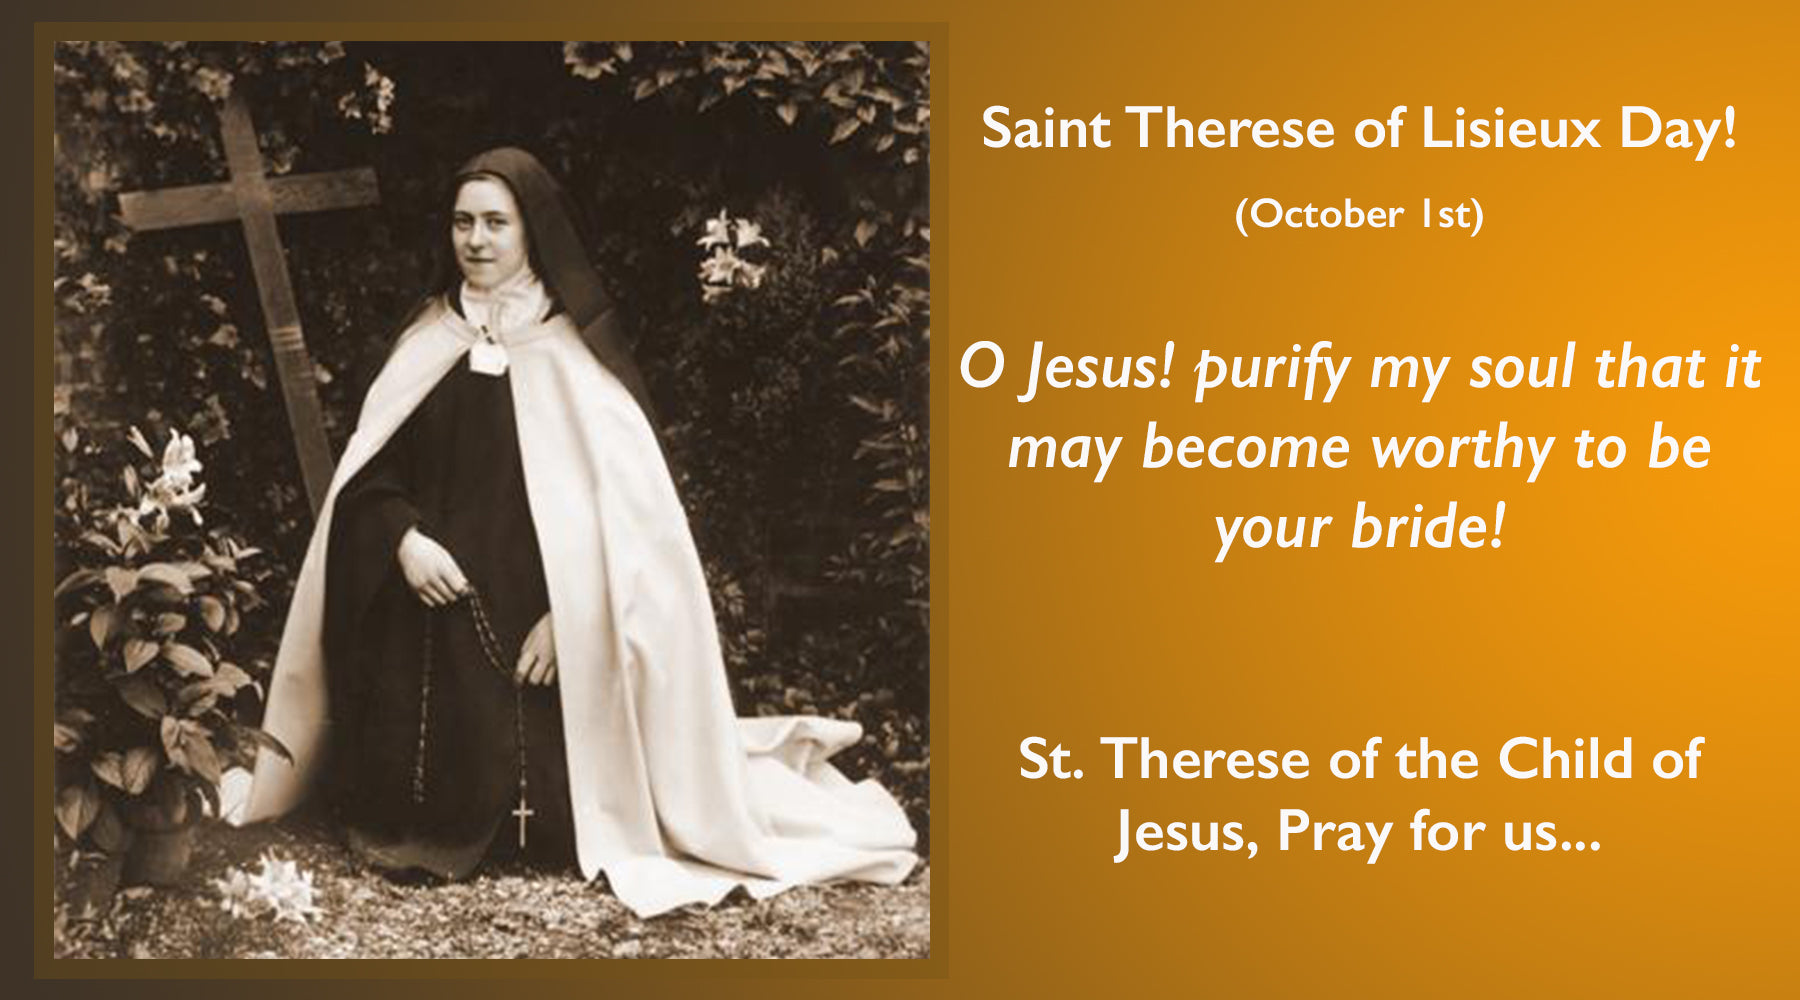 Saint Therese Child of Jesus, Pray for us...